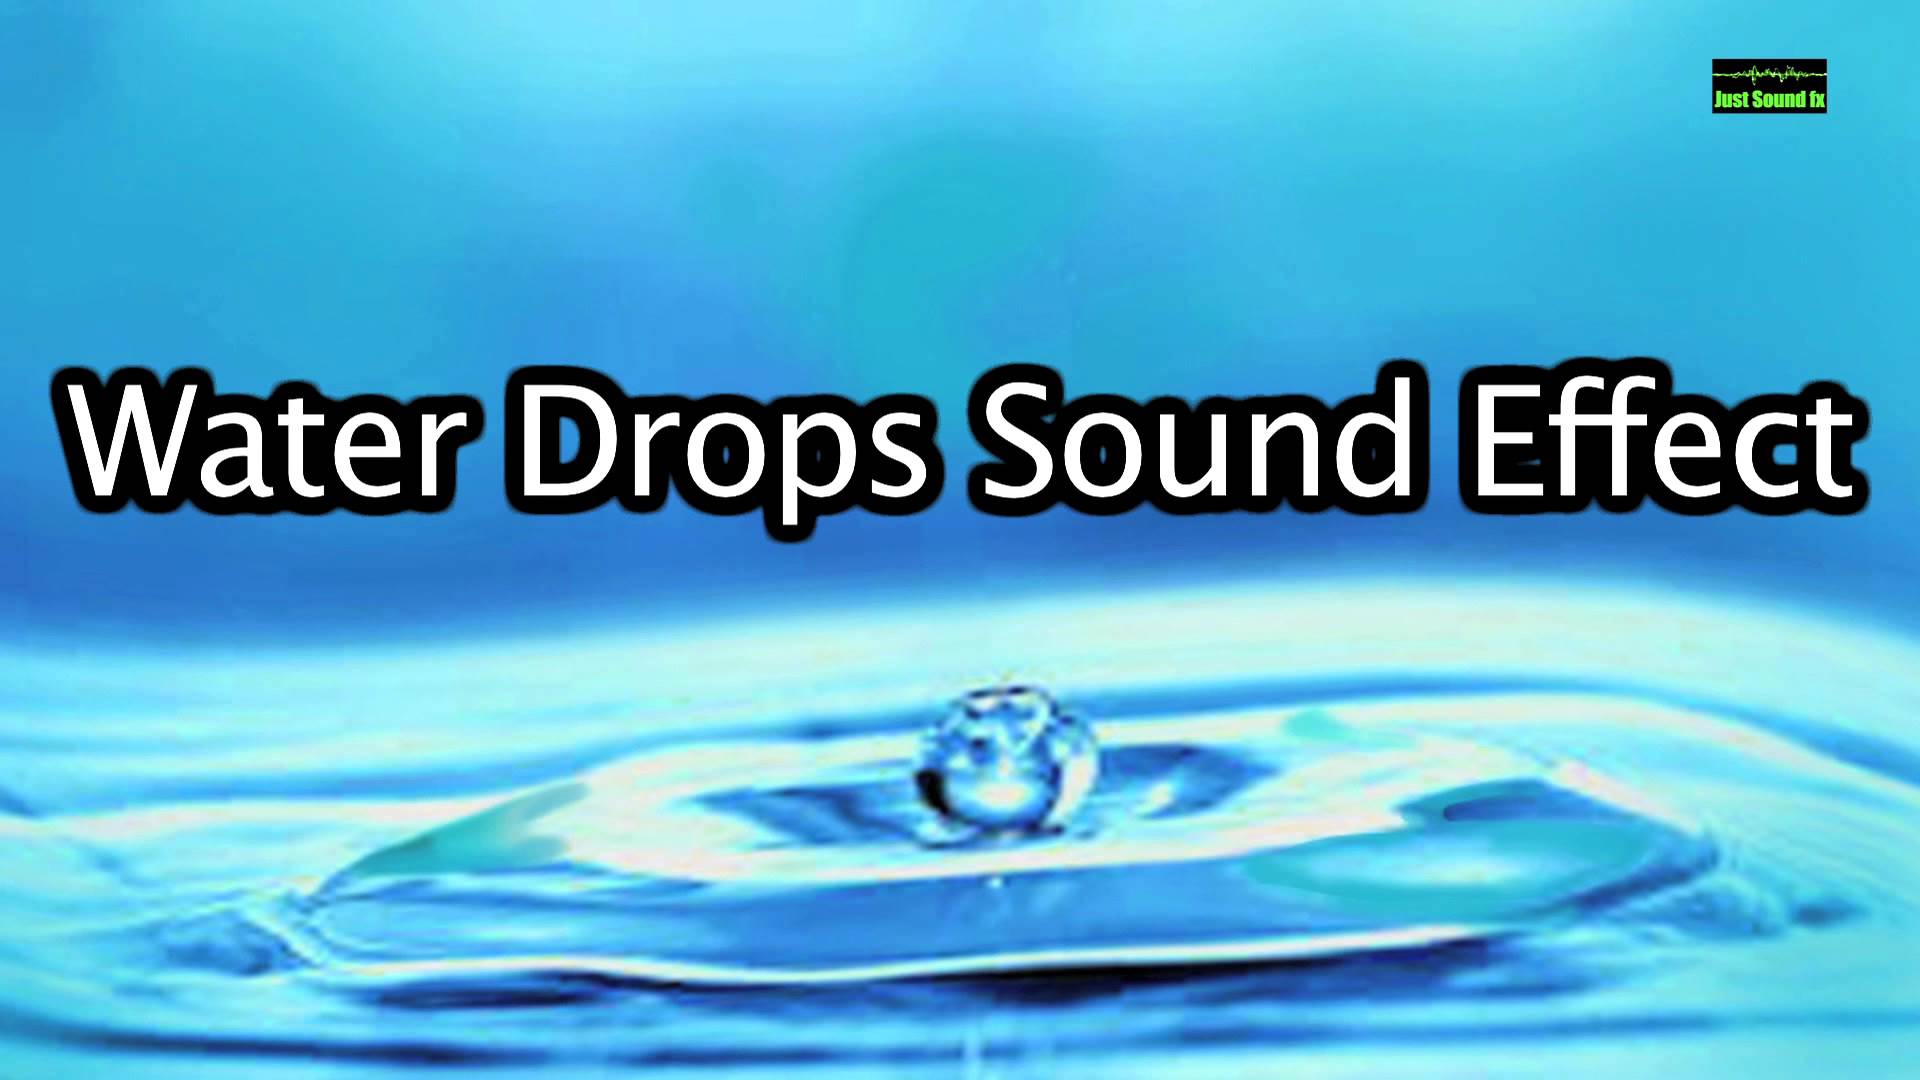 Water Drops Sound Effect - YouTube